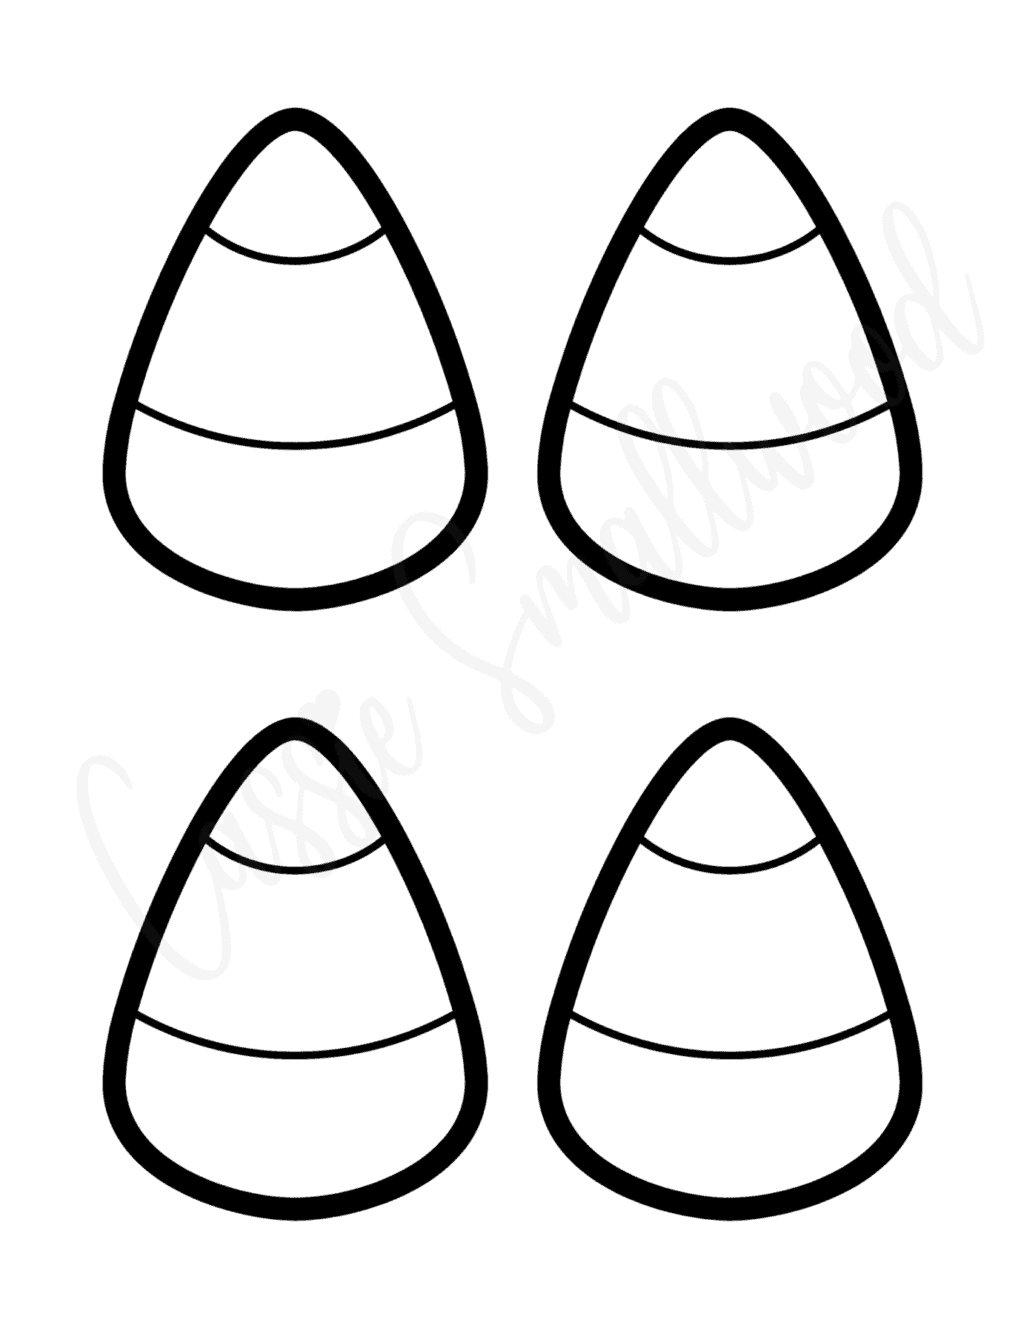 Cute candy corn templates black and white color